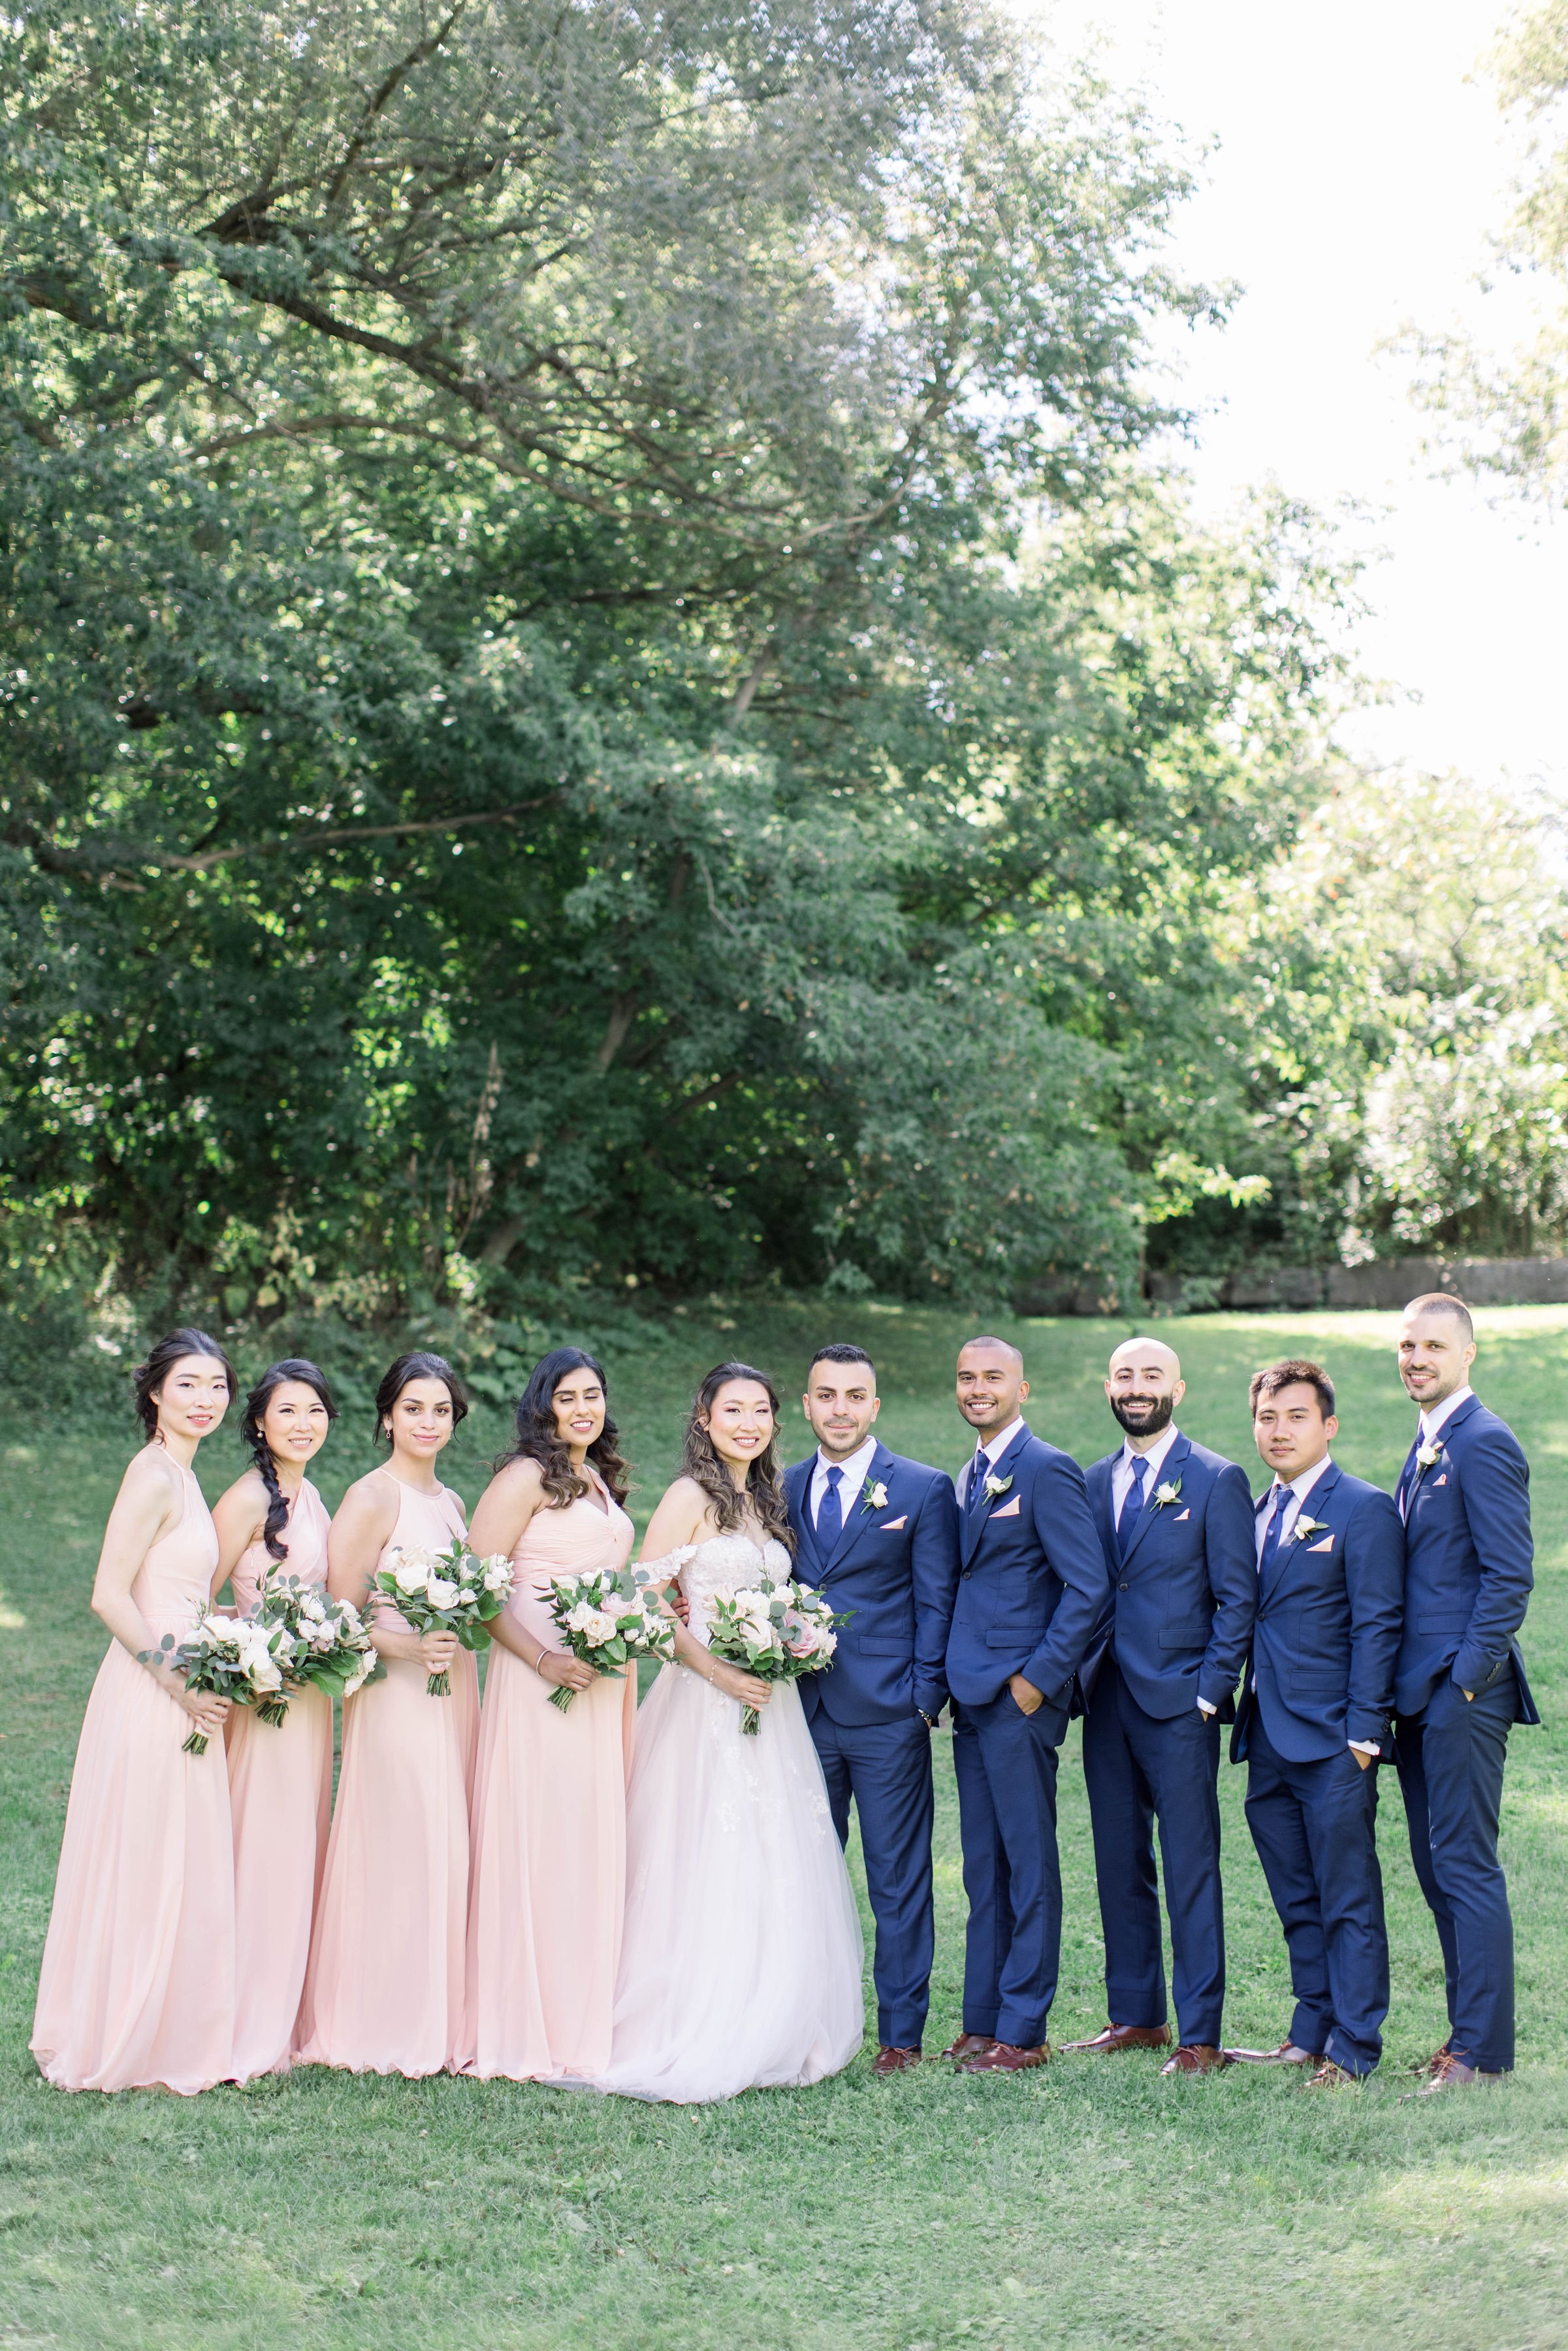  Chelsea Mason Photography captures a bridal party in light pink and blue in a green location in Ottawa. spring bridesmaid dress #ChelseaMasonPhotography #ChelseaMasonWeddings #DowntownOttawa #FairmontChateauLaurier #OttawaWeddings #OttawaPhotographe